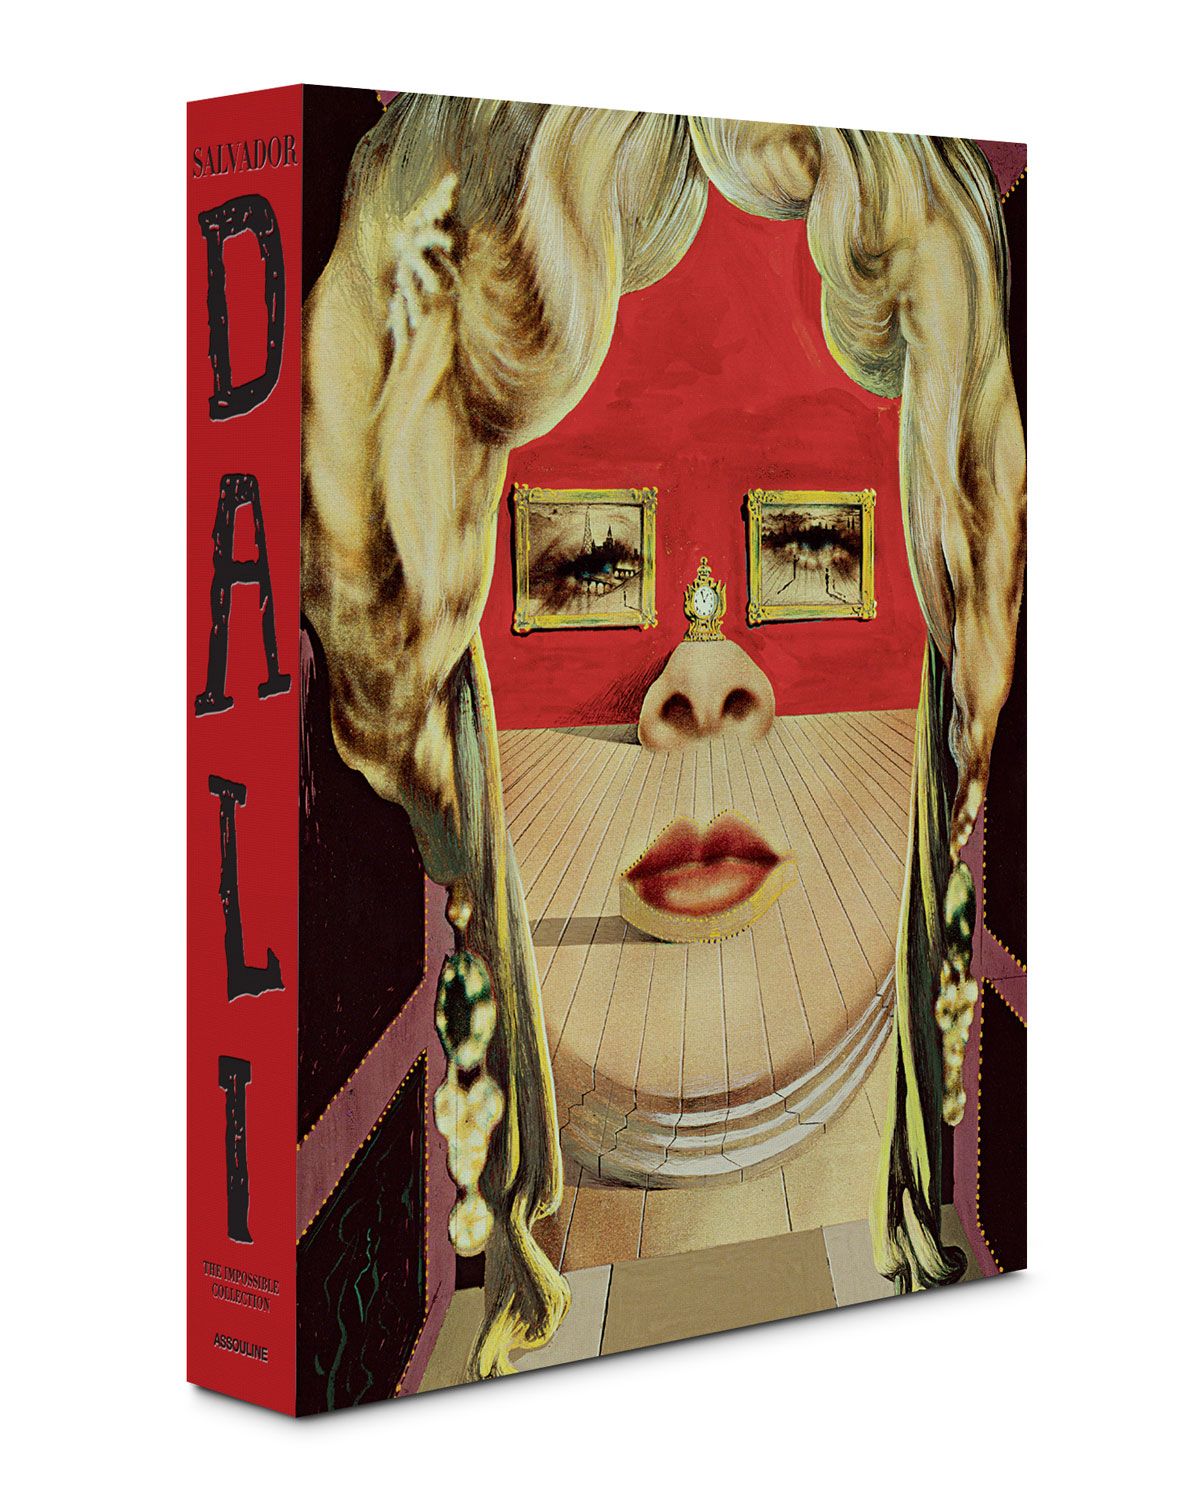 Salvador Dali: The Impossible Collection" Book | Neiman Marcus